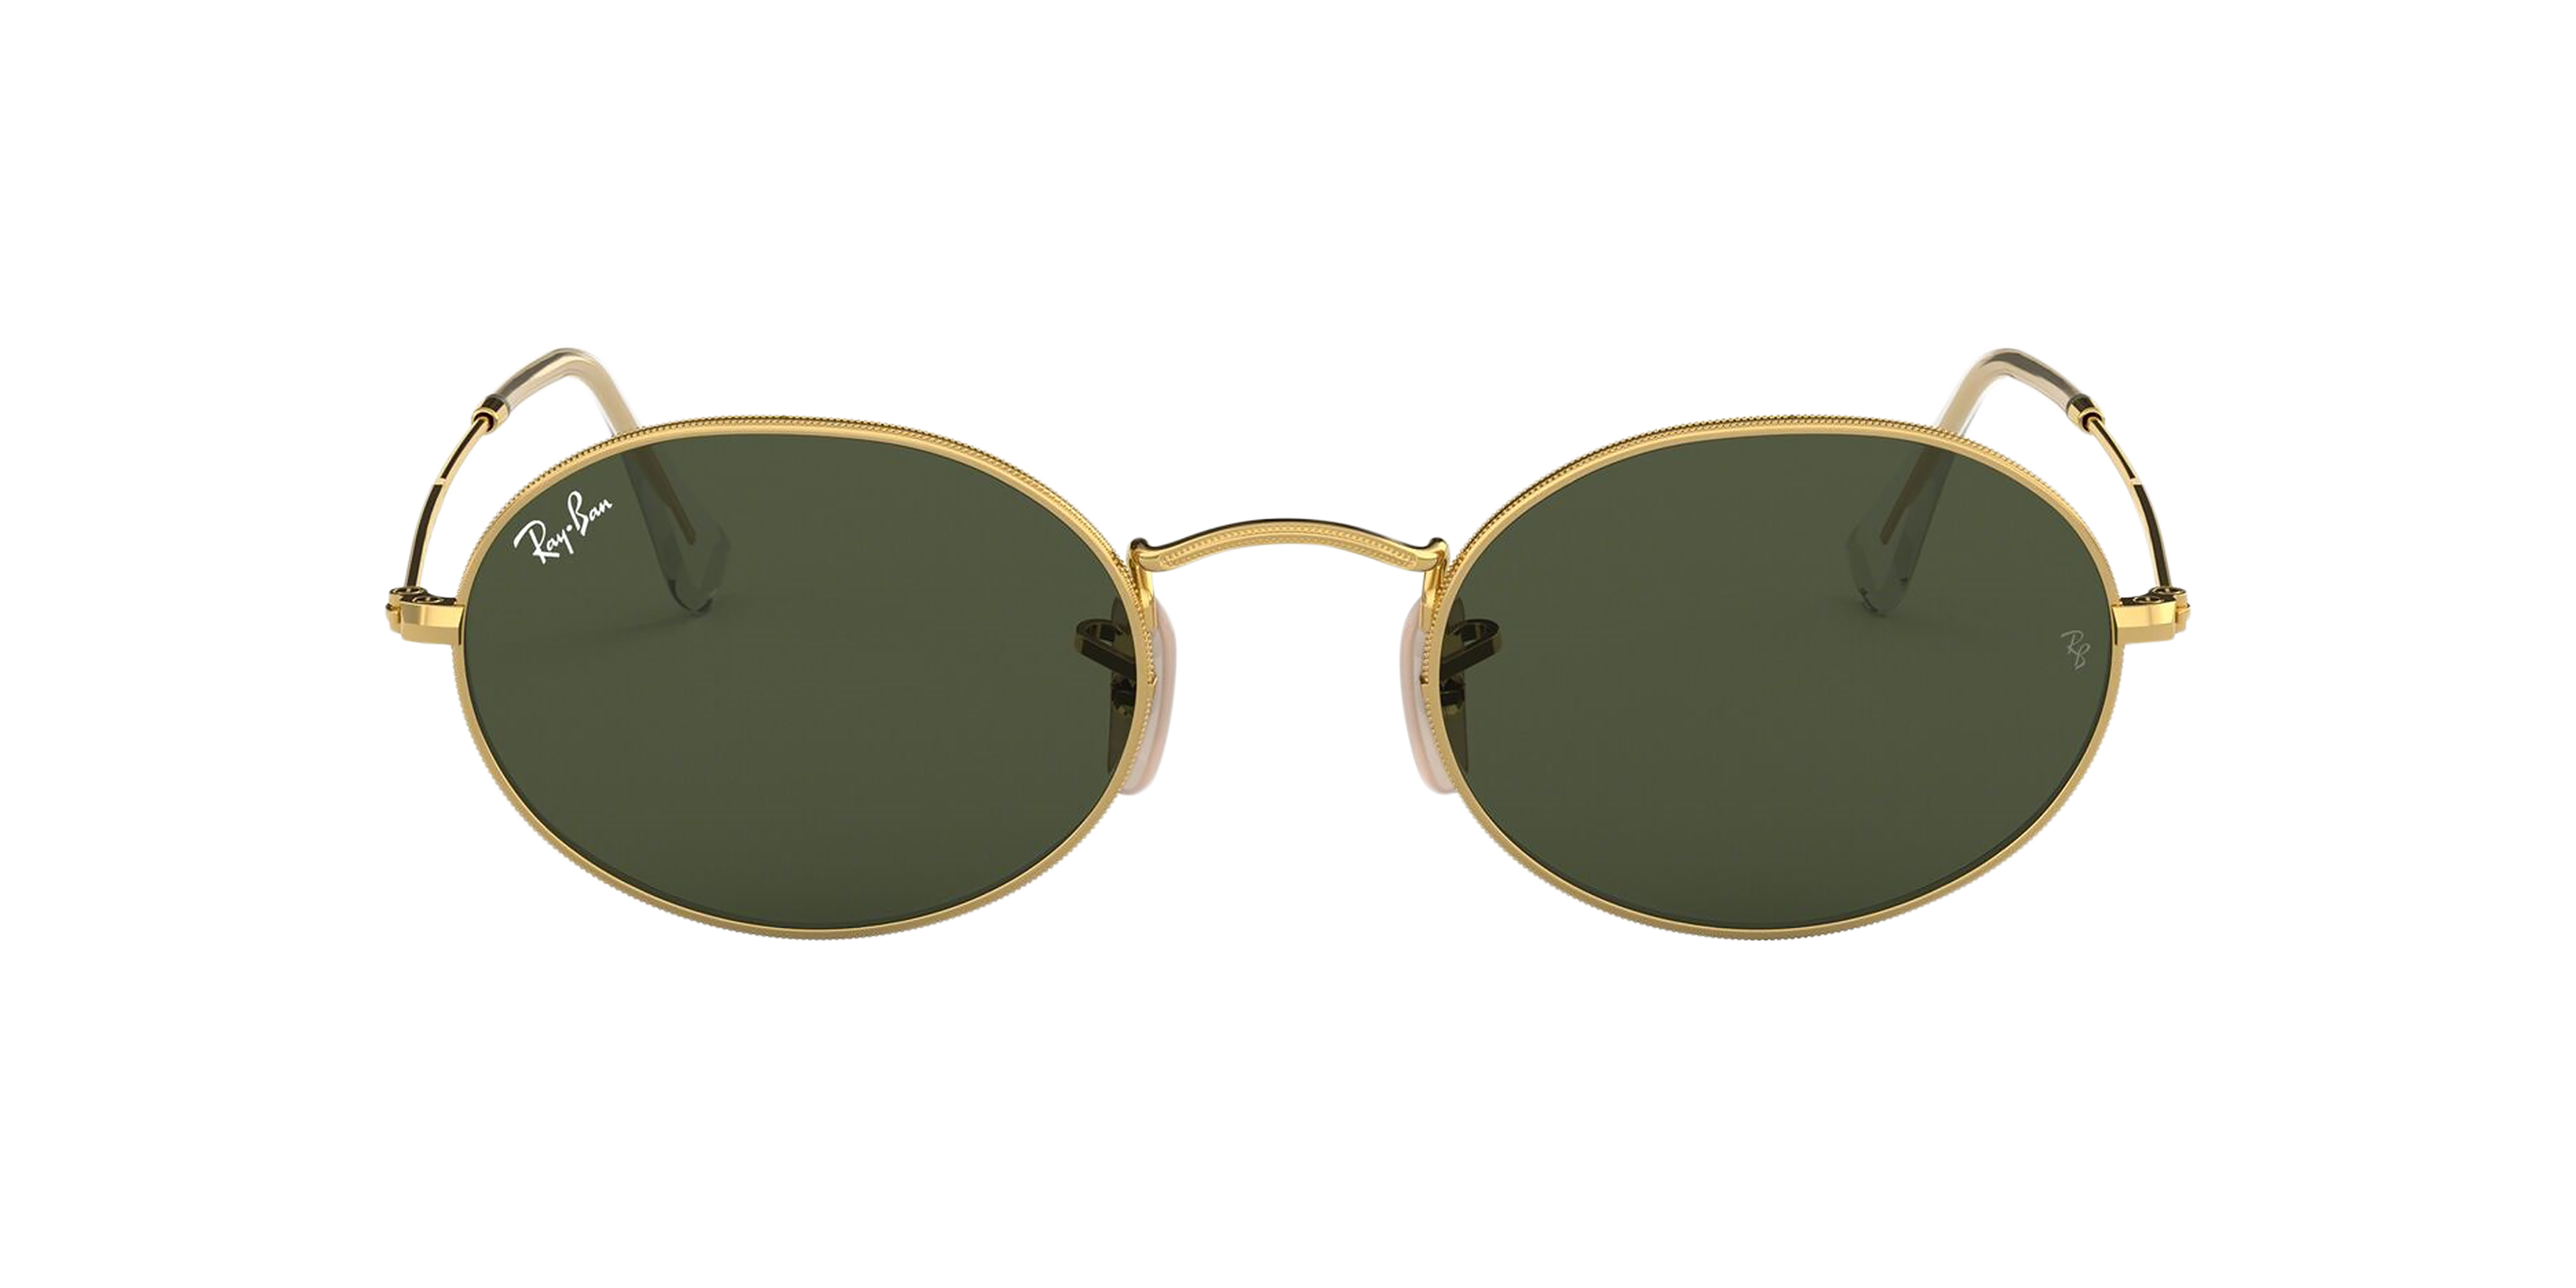 [products.image.front] Ray-Ban Oval RB3547 001/31